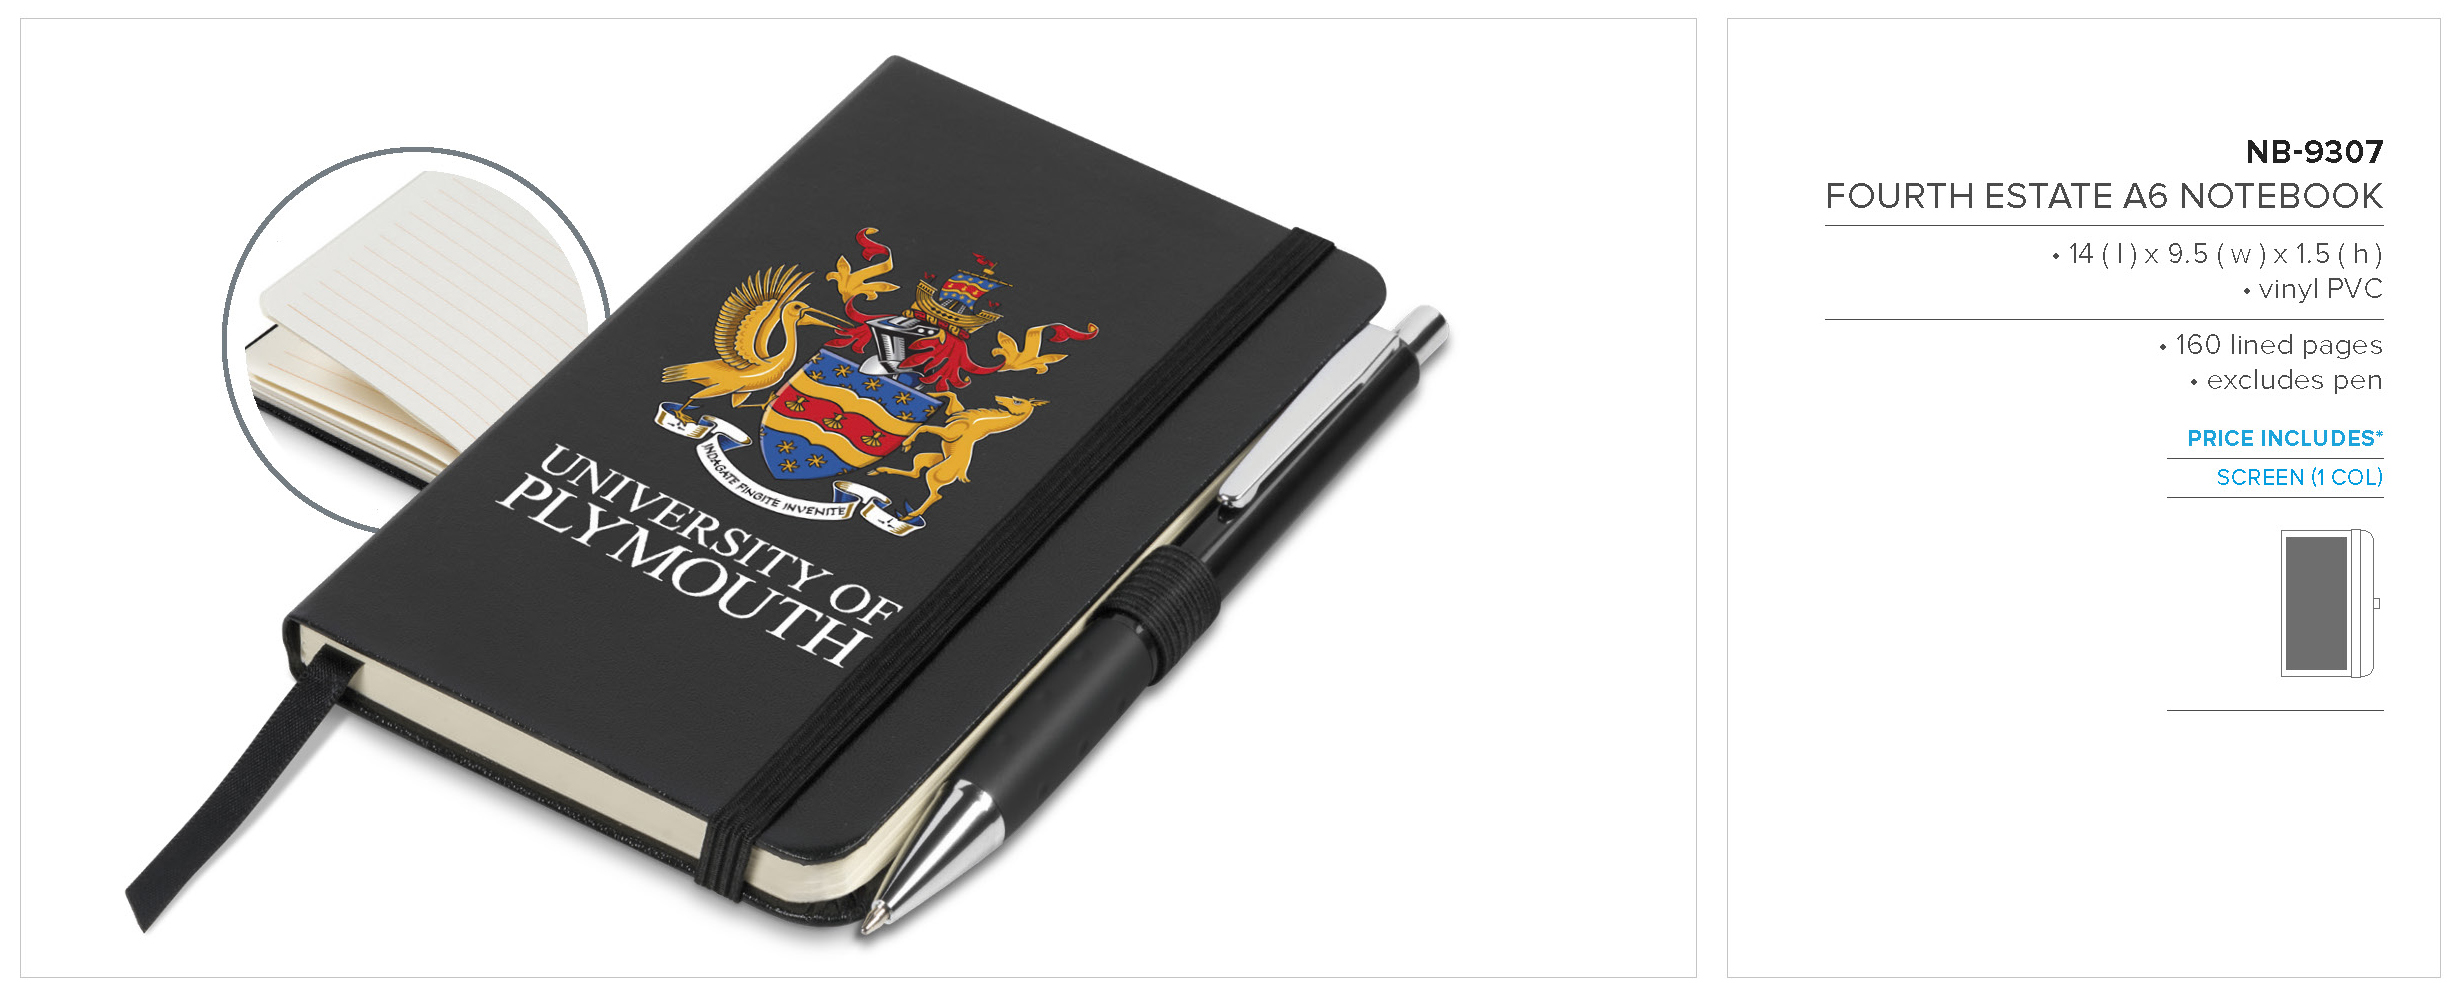 NB-9307 - Fourth Estate A6 Hard Cover Notebook - Catalogue Image